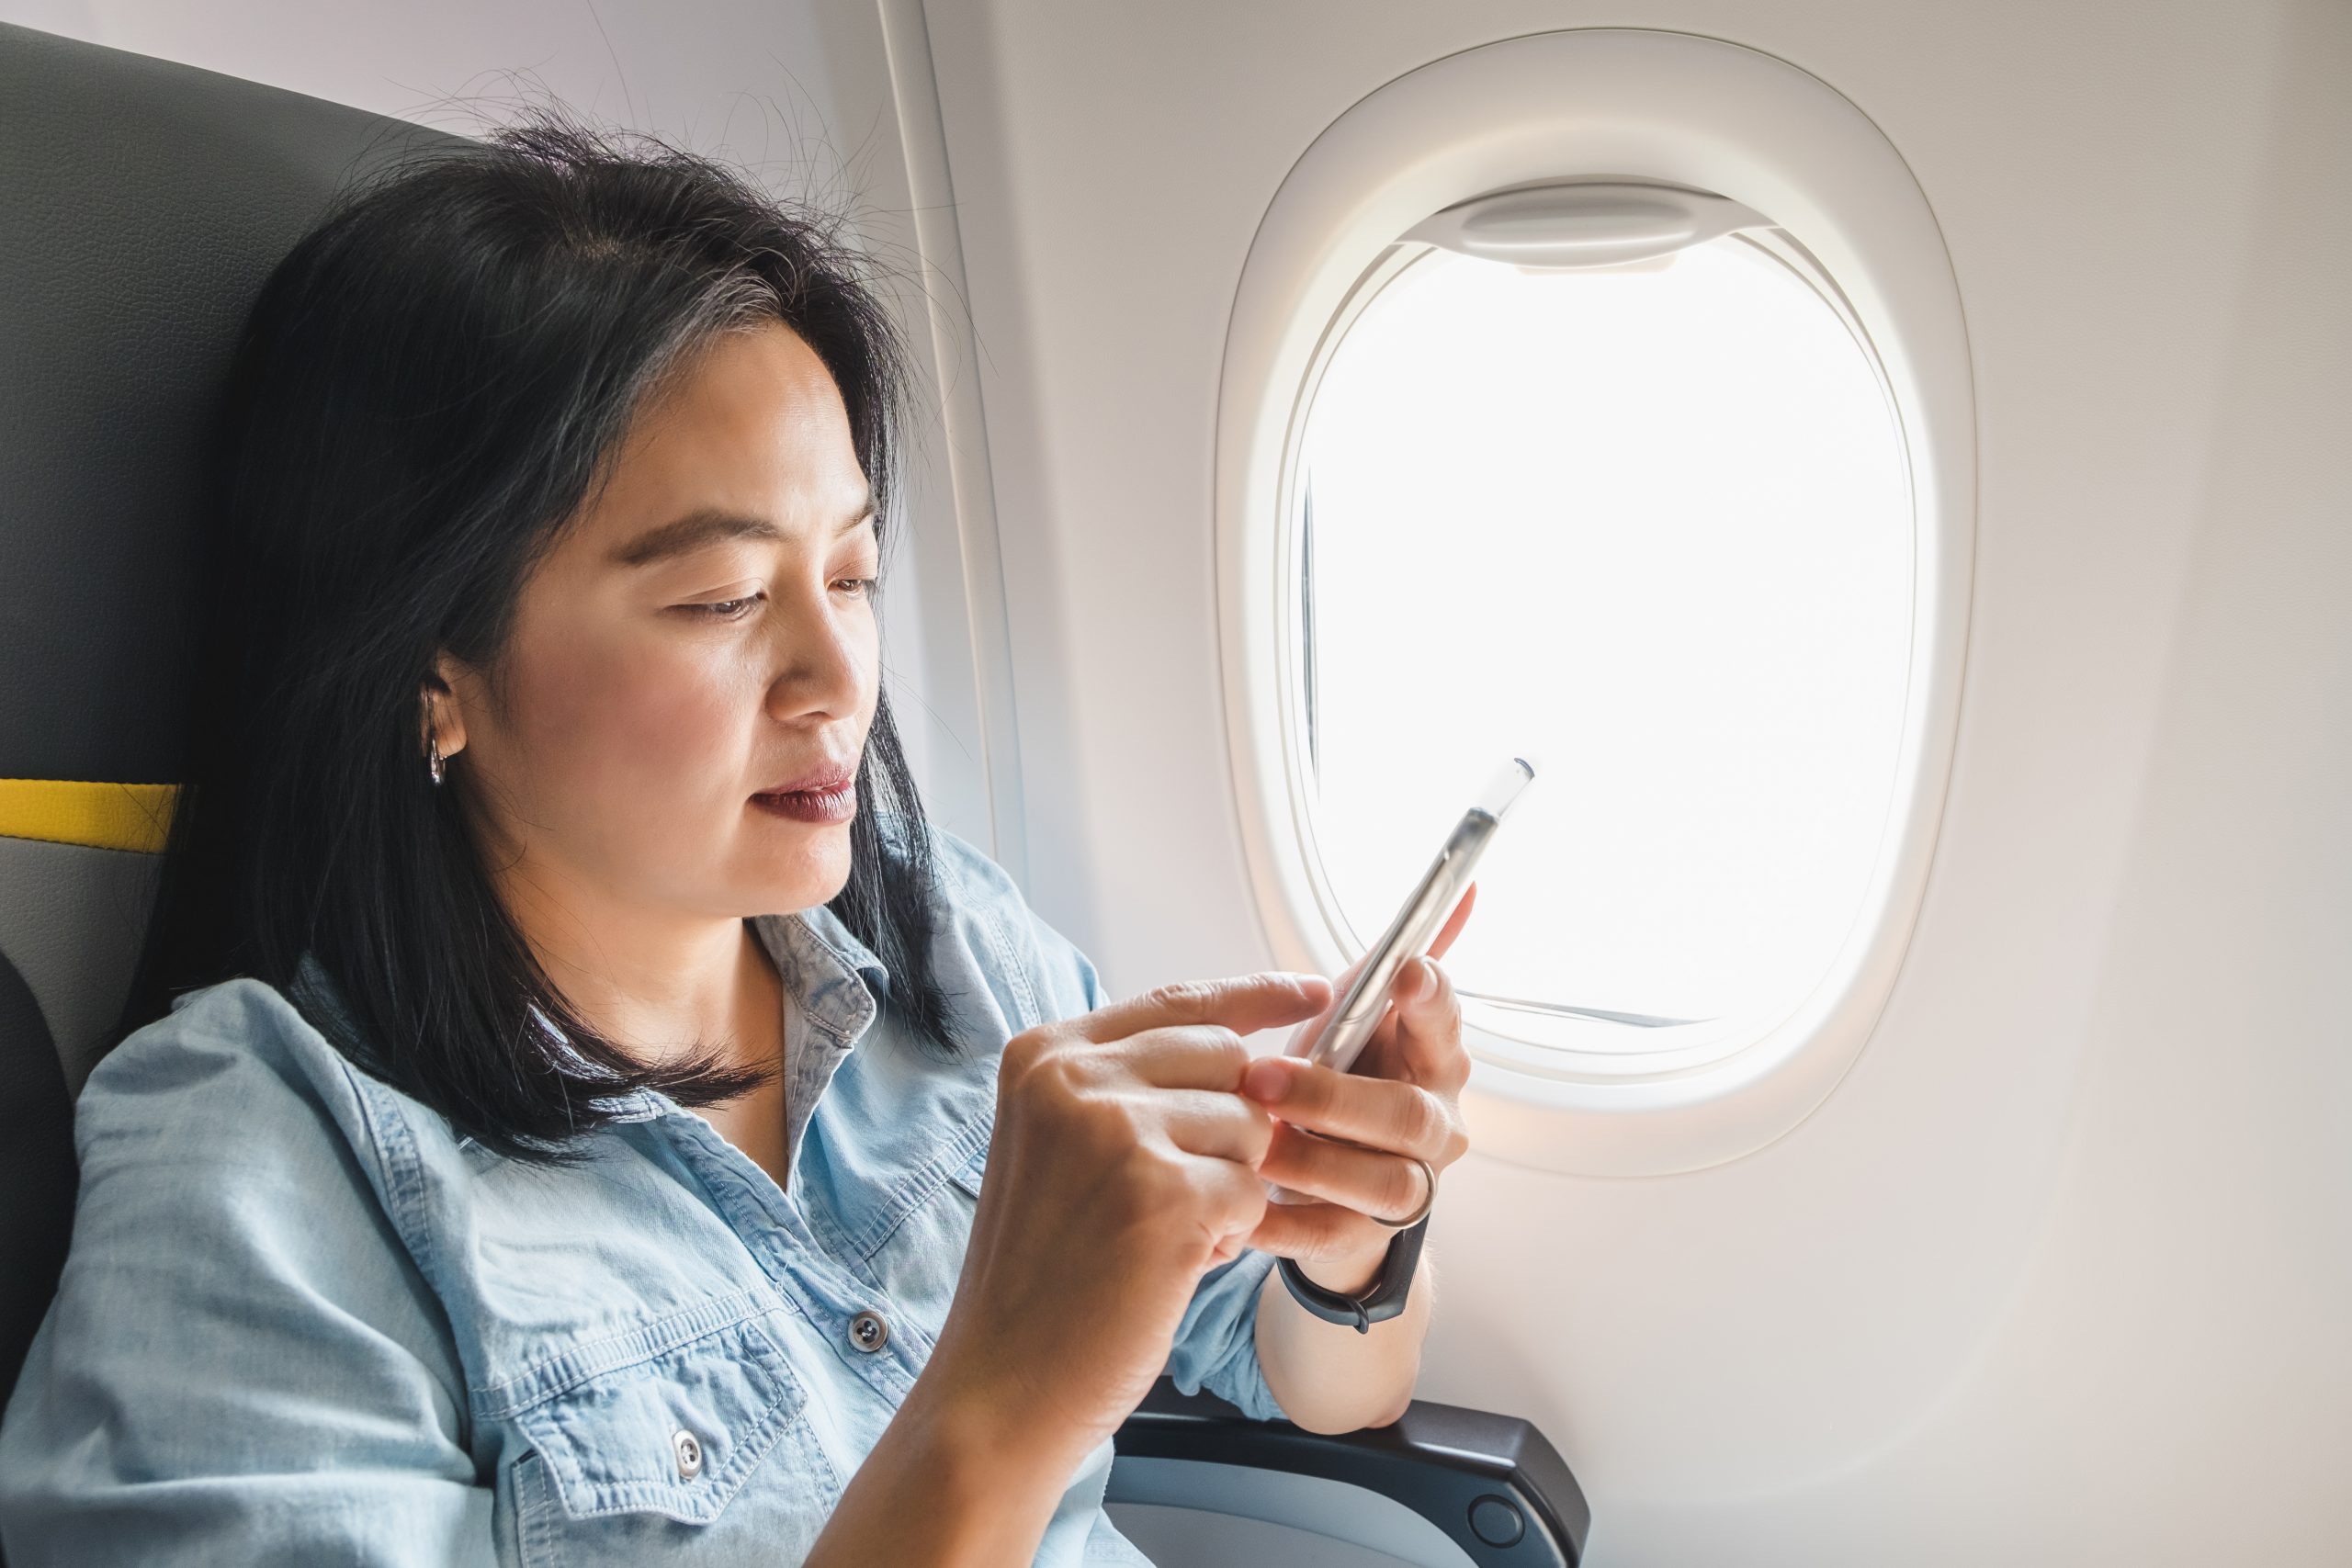 Airplane Mode – Why Do We Need to Activate It?